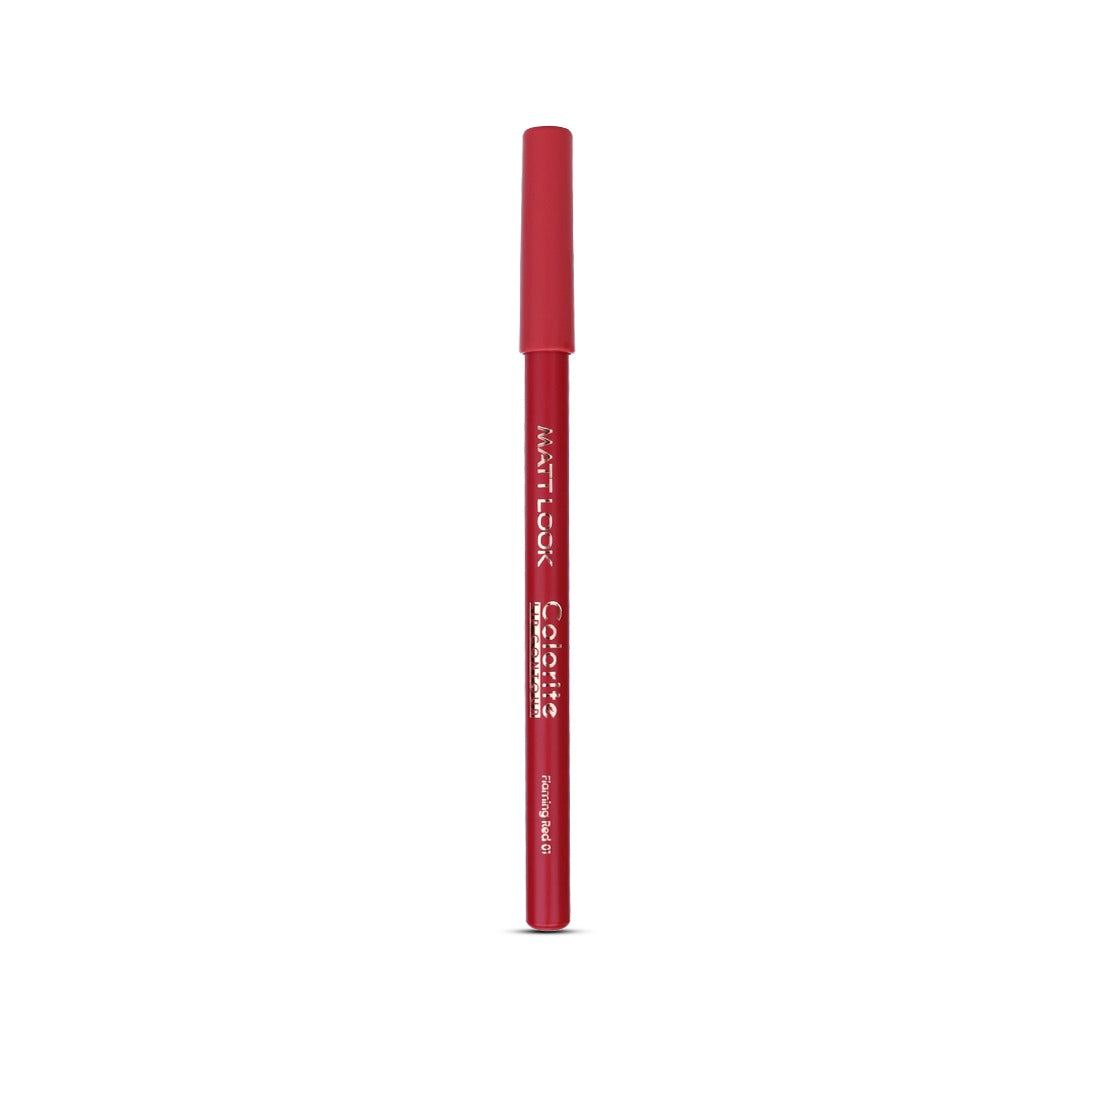 Mattlook Colorite Lip Contour, Long lasting, Smudge proof, Enriched with Vitamin E, Glides smoothly, One stroke application, Lip Liner